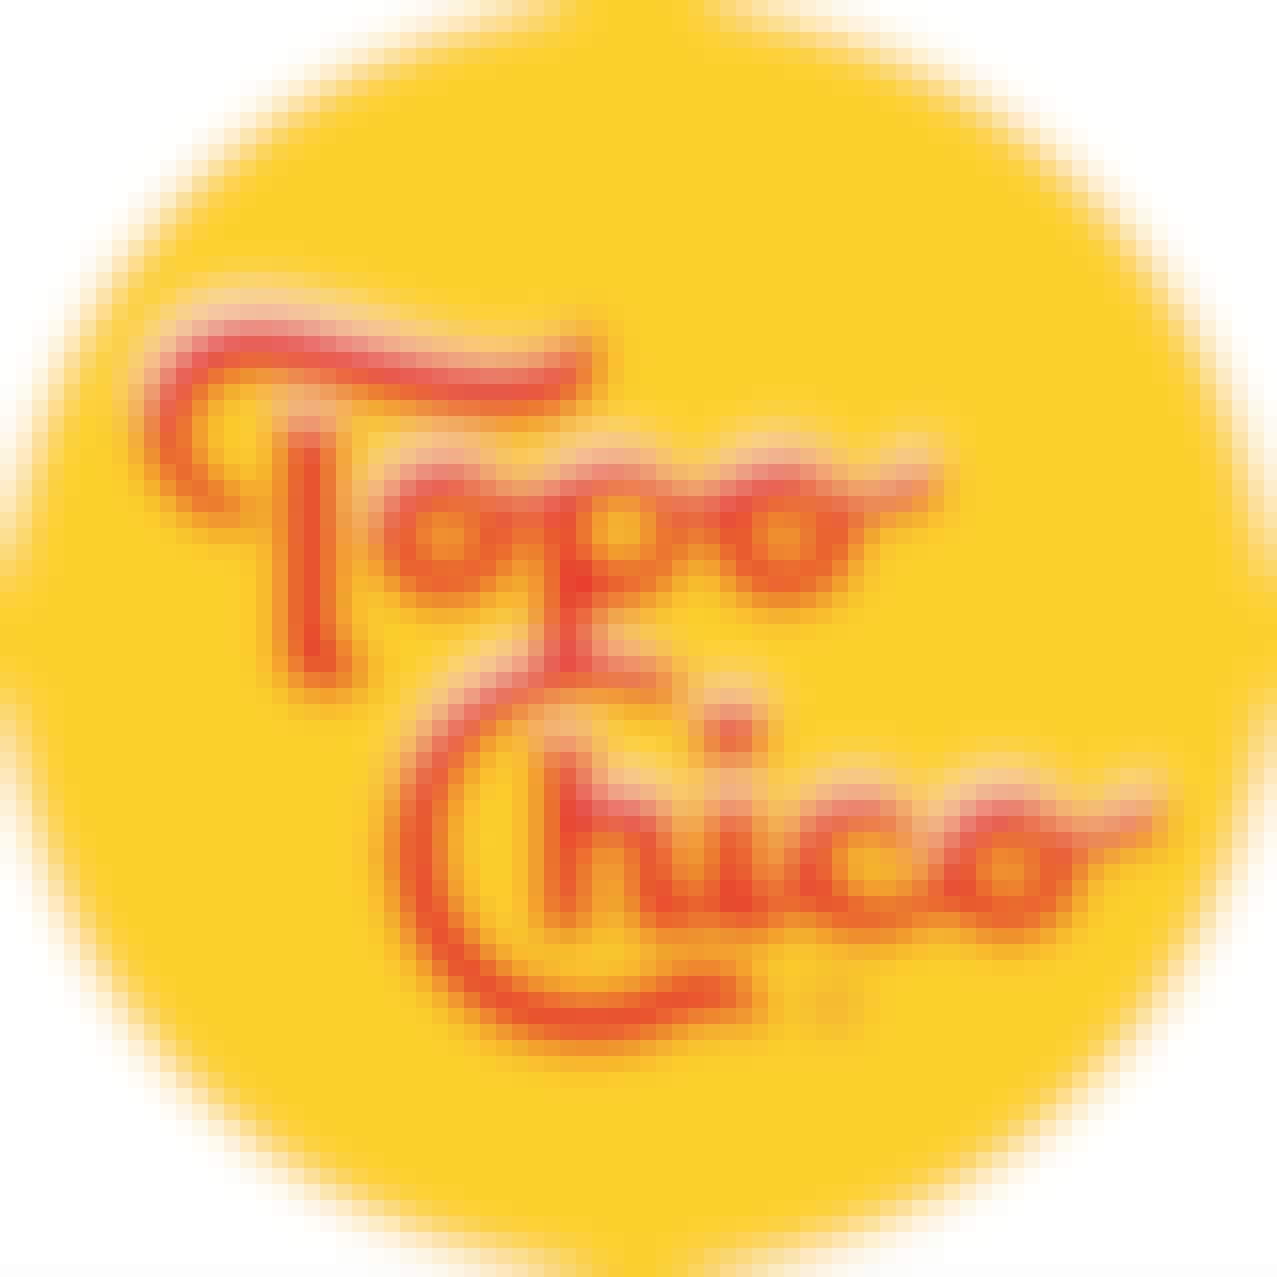 Topo Chico Margarita Seltzer Variety Pack 12 pack 12 oz. Can